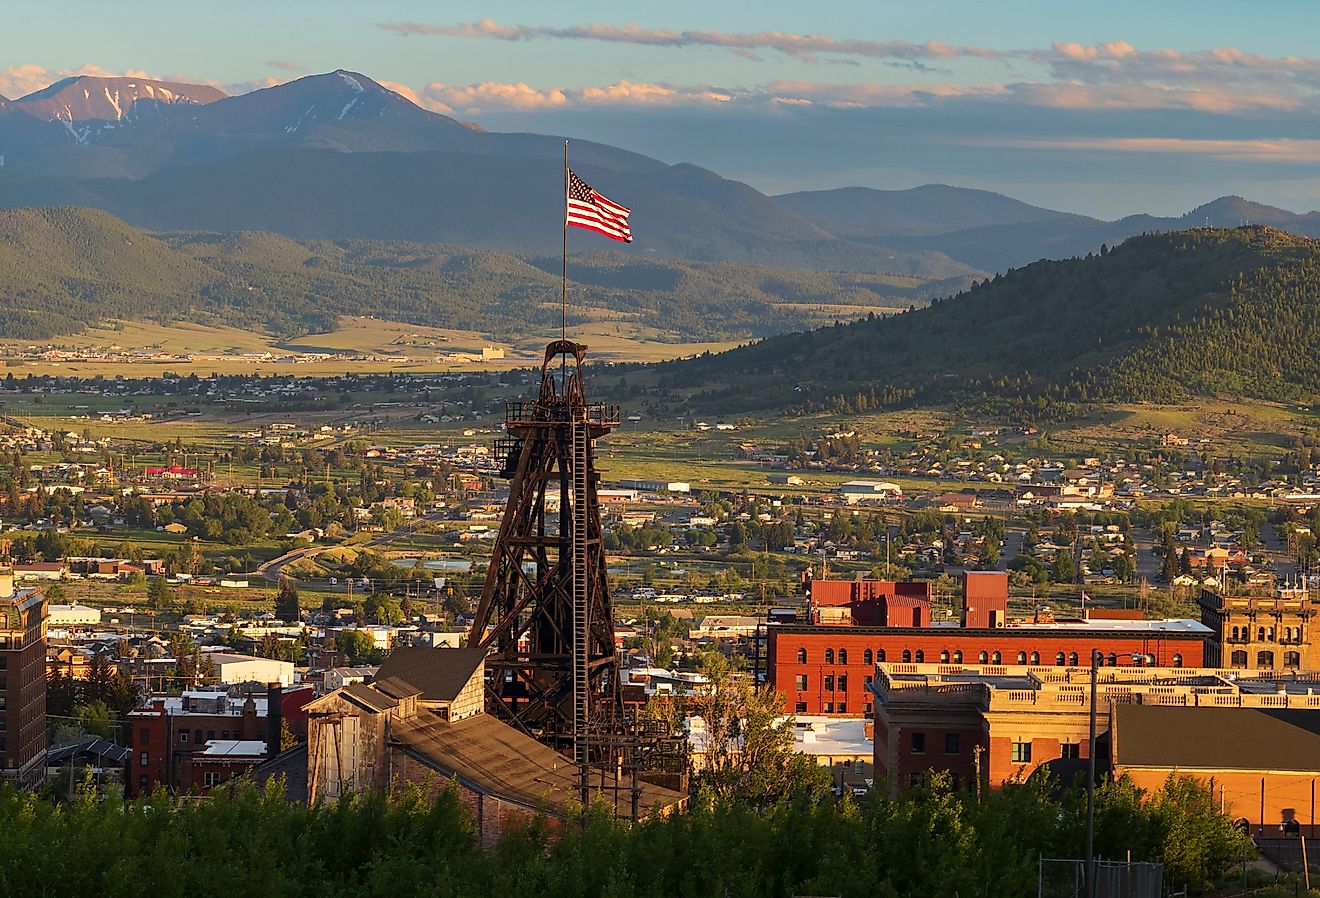 11 Oldest Founded Towns to Visit in Montana